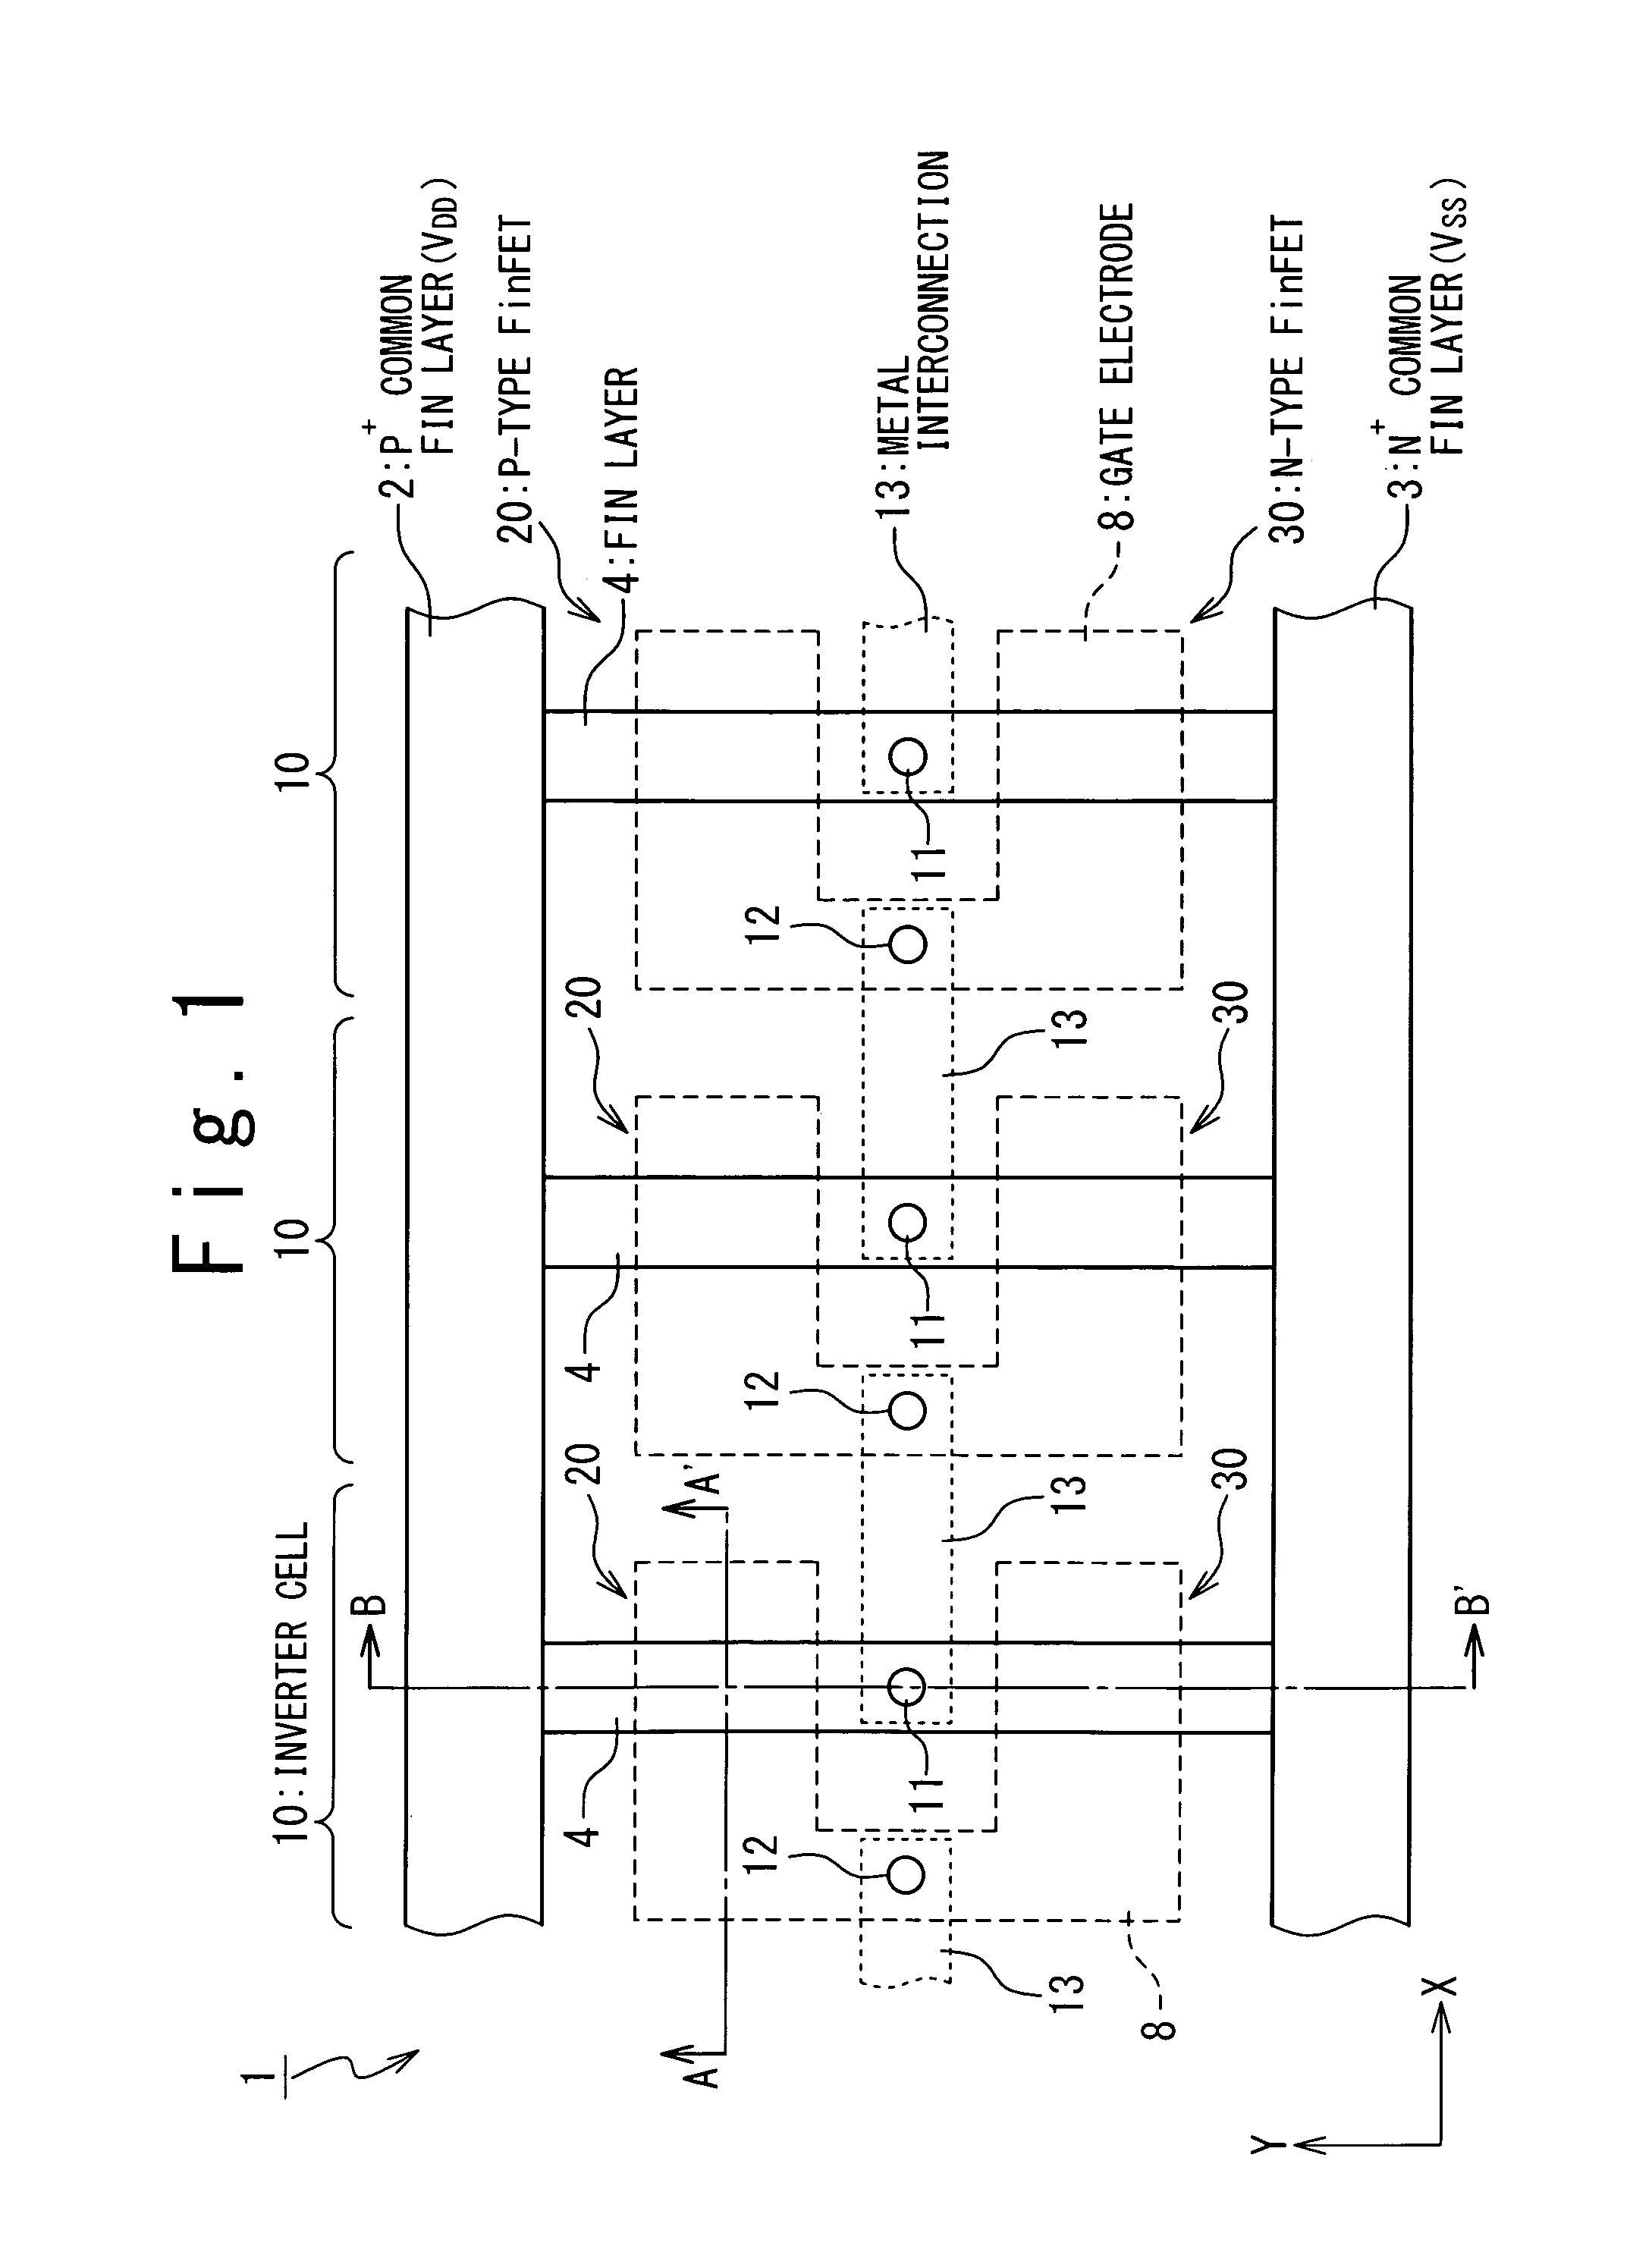 Semiconductor device with three-dimensional field effect transistor structure